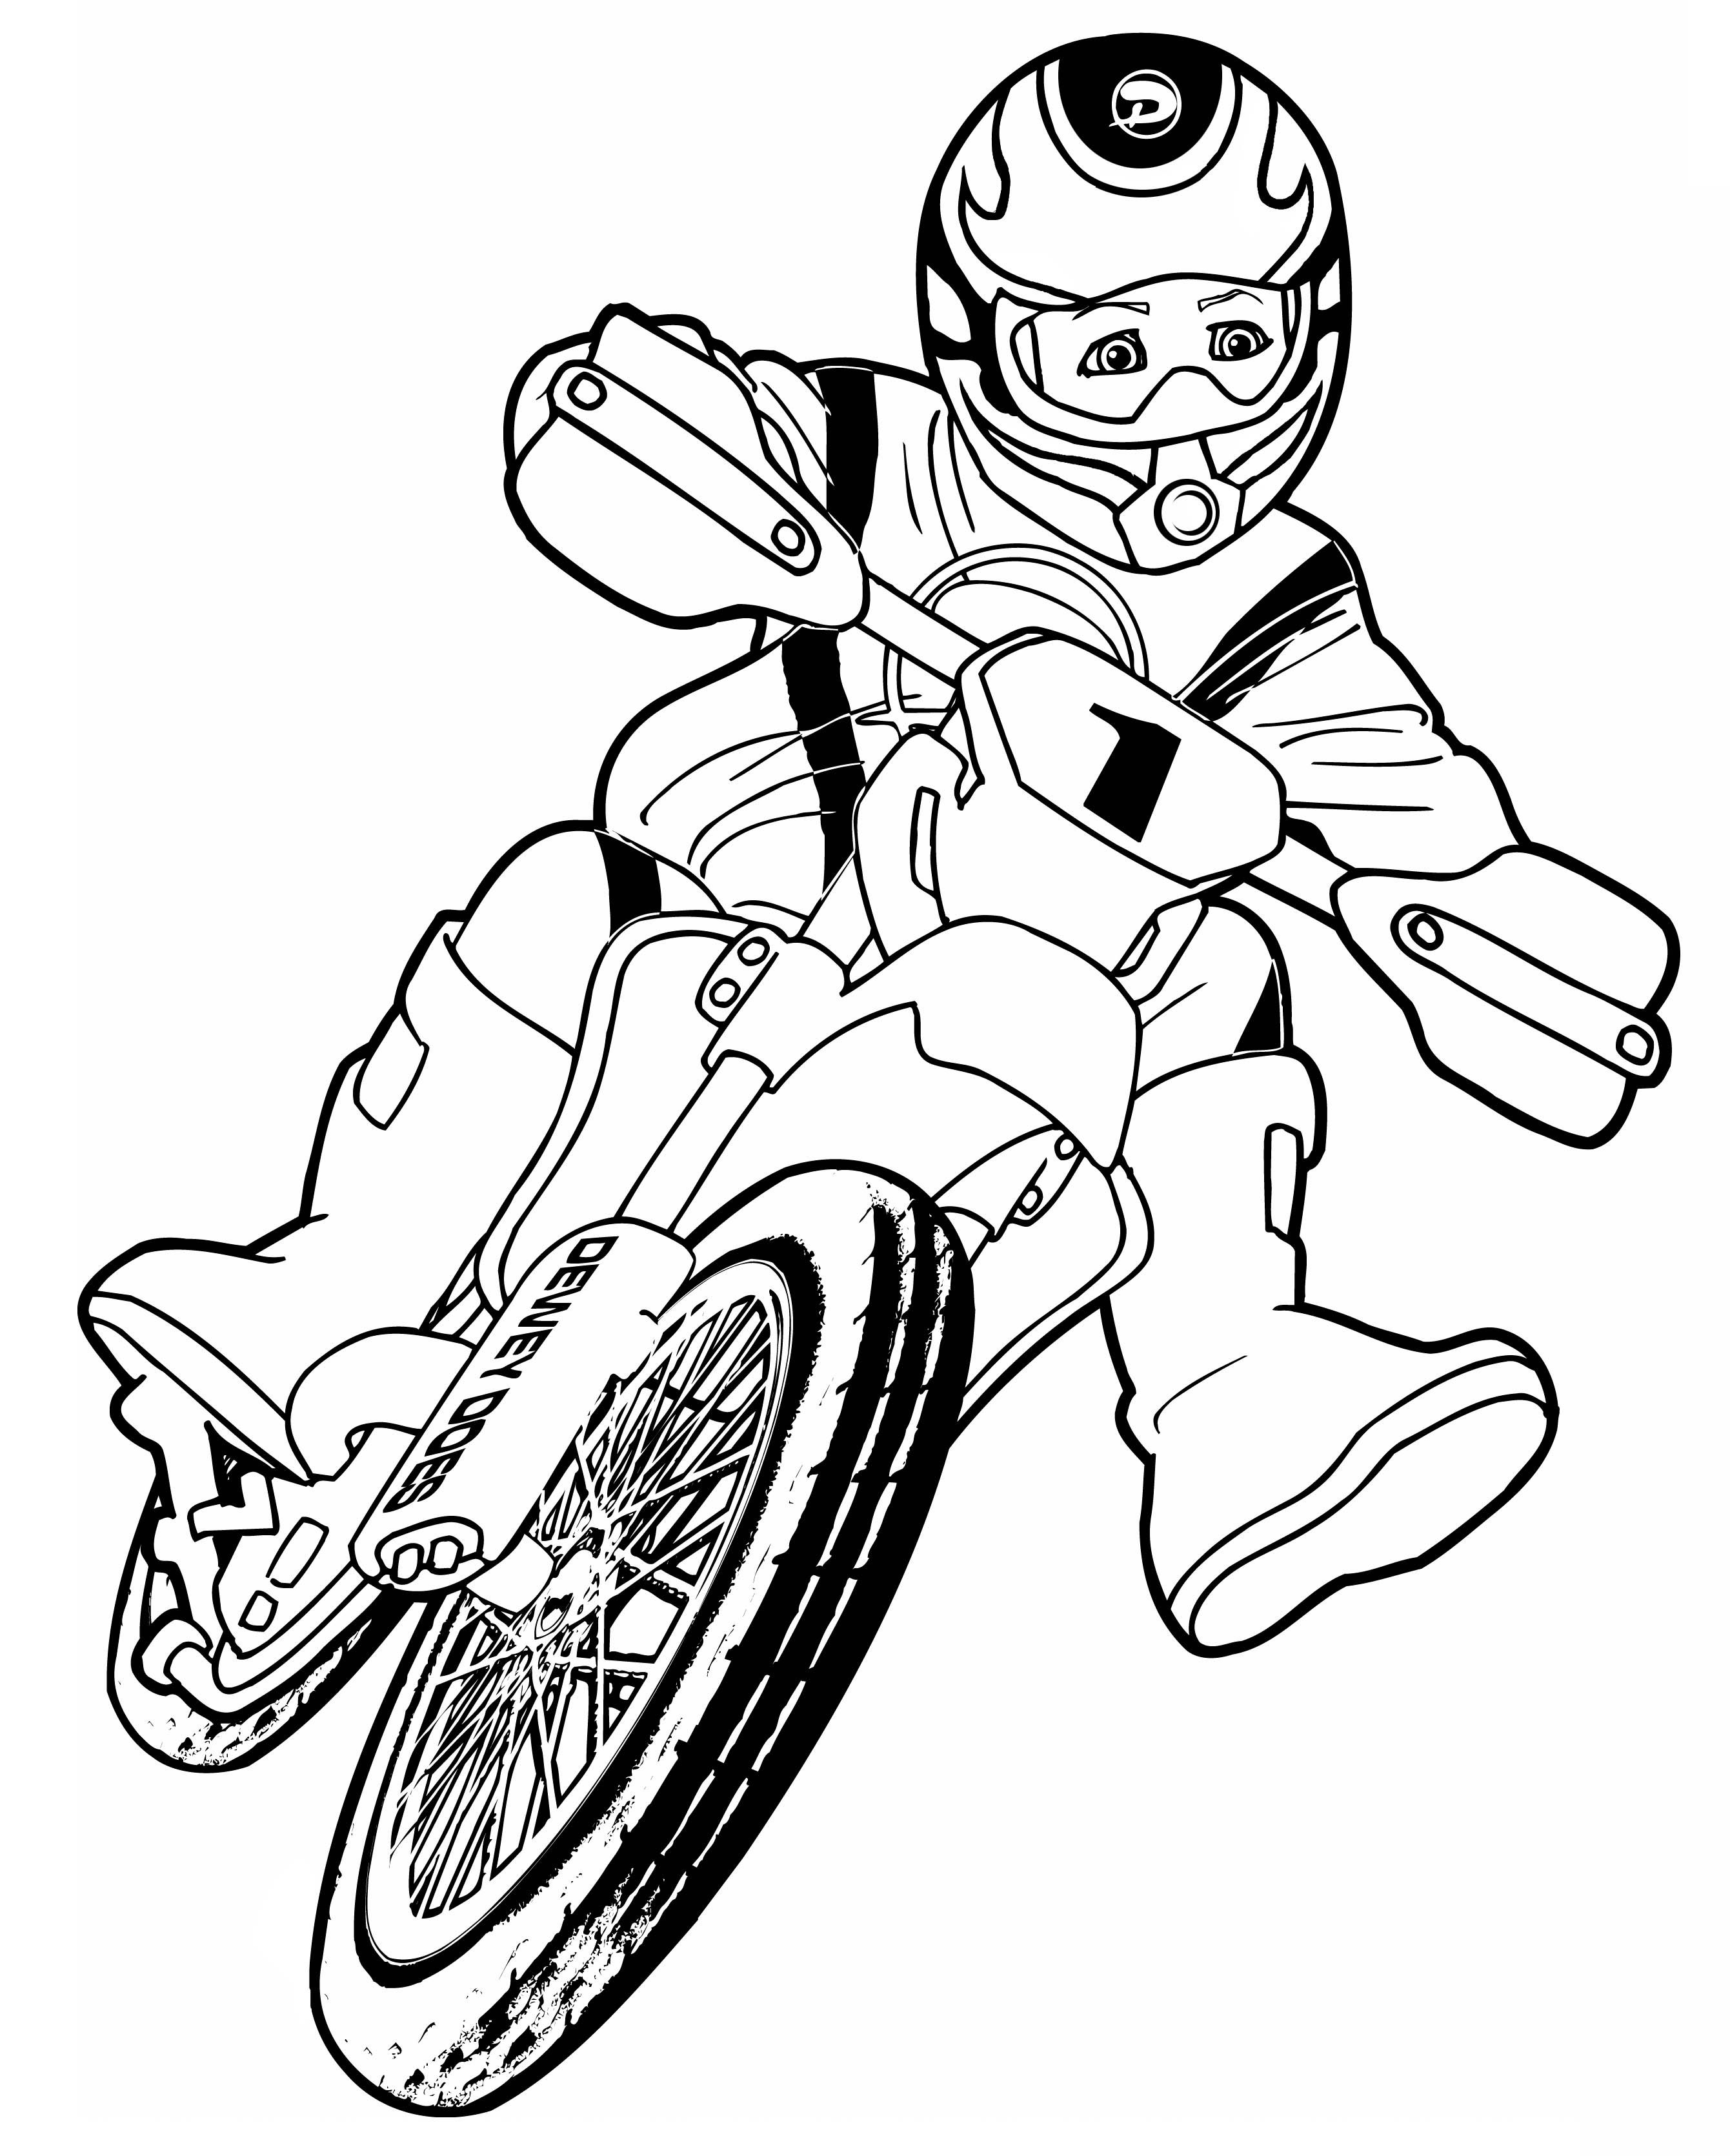 Dirt bike coloring pages | Coloring pages, Cars coloring ...